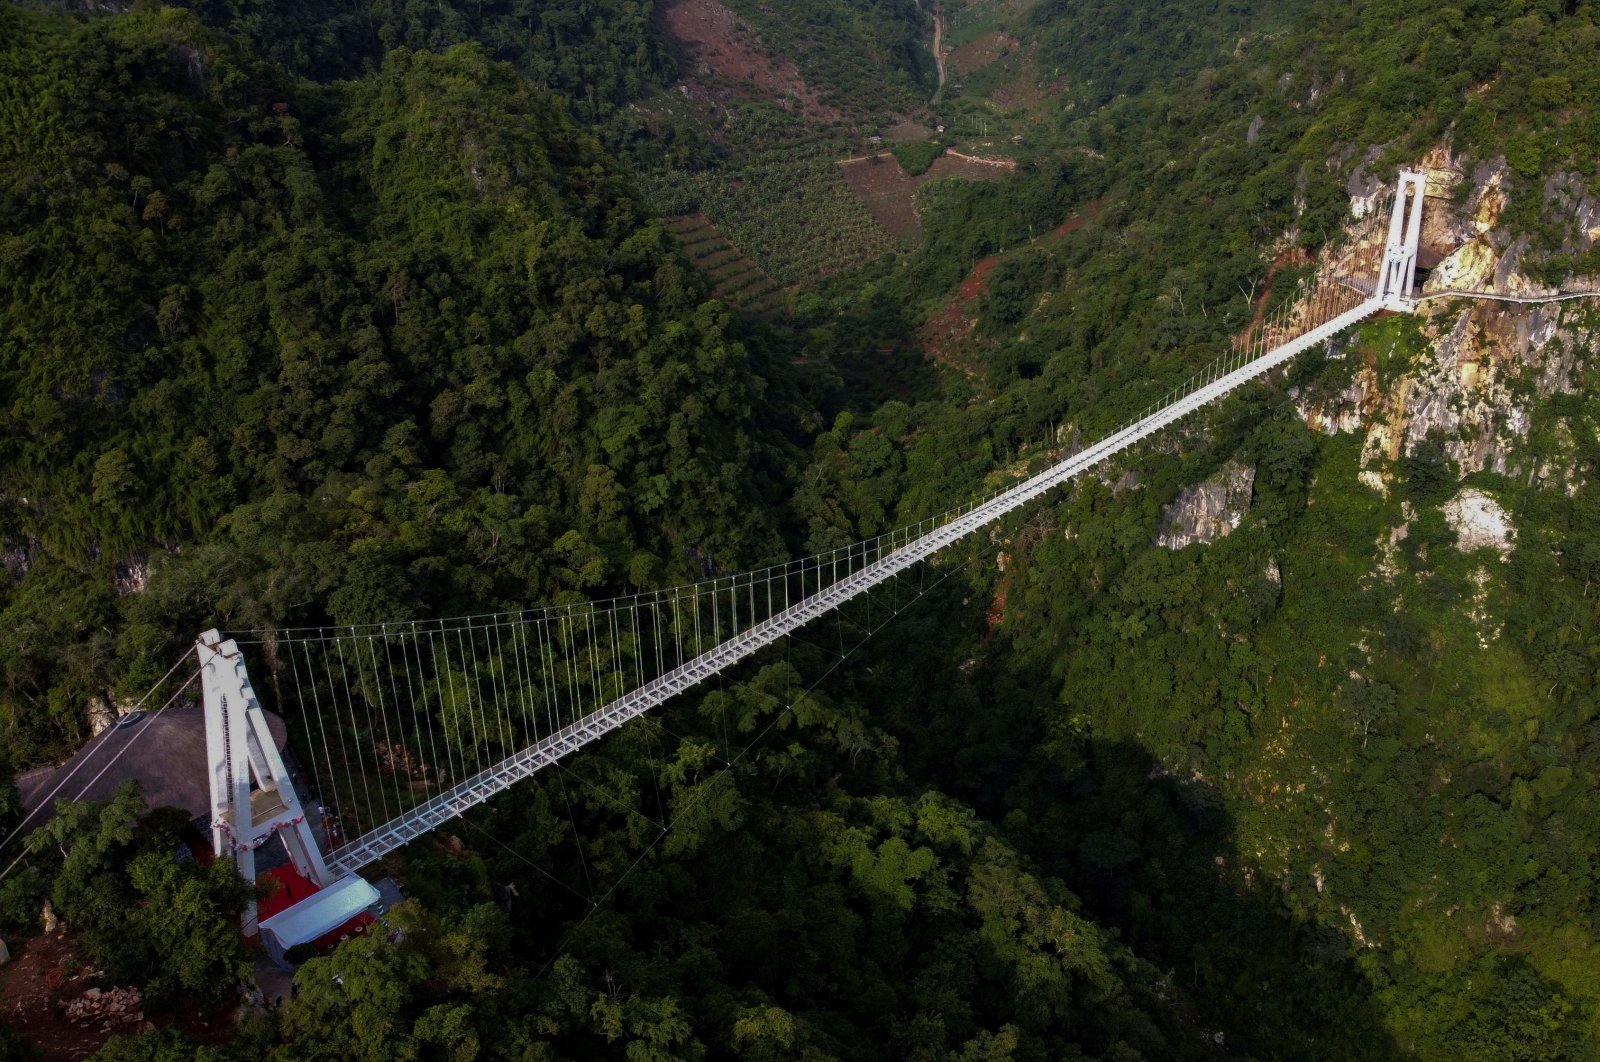 An aerial view of the Bach Long glass bridge at Moc Chau district in Son La province, Vietnam, May 28, 2022. (Reuters Photo)